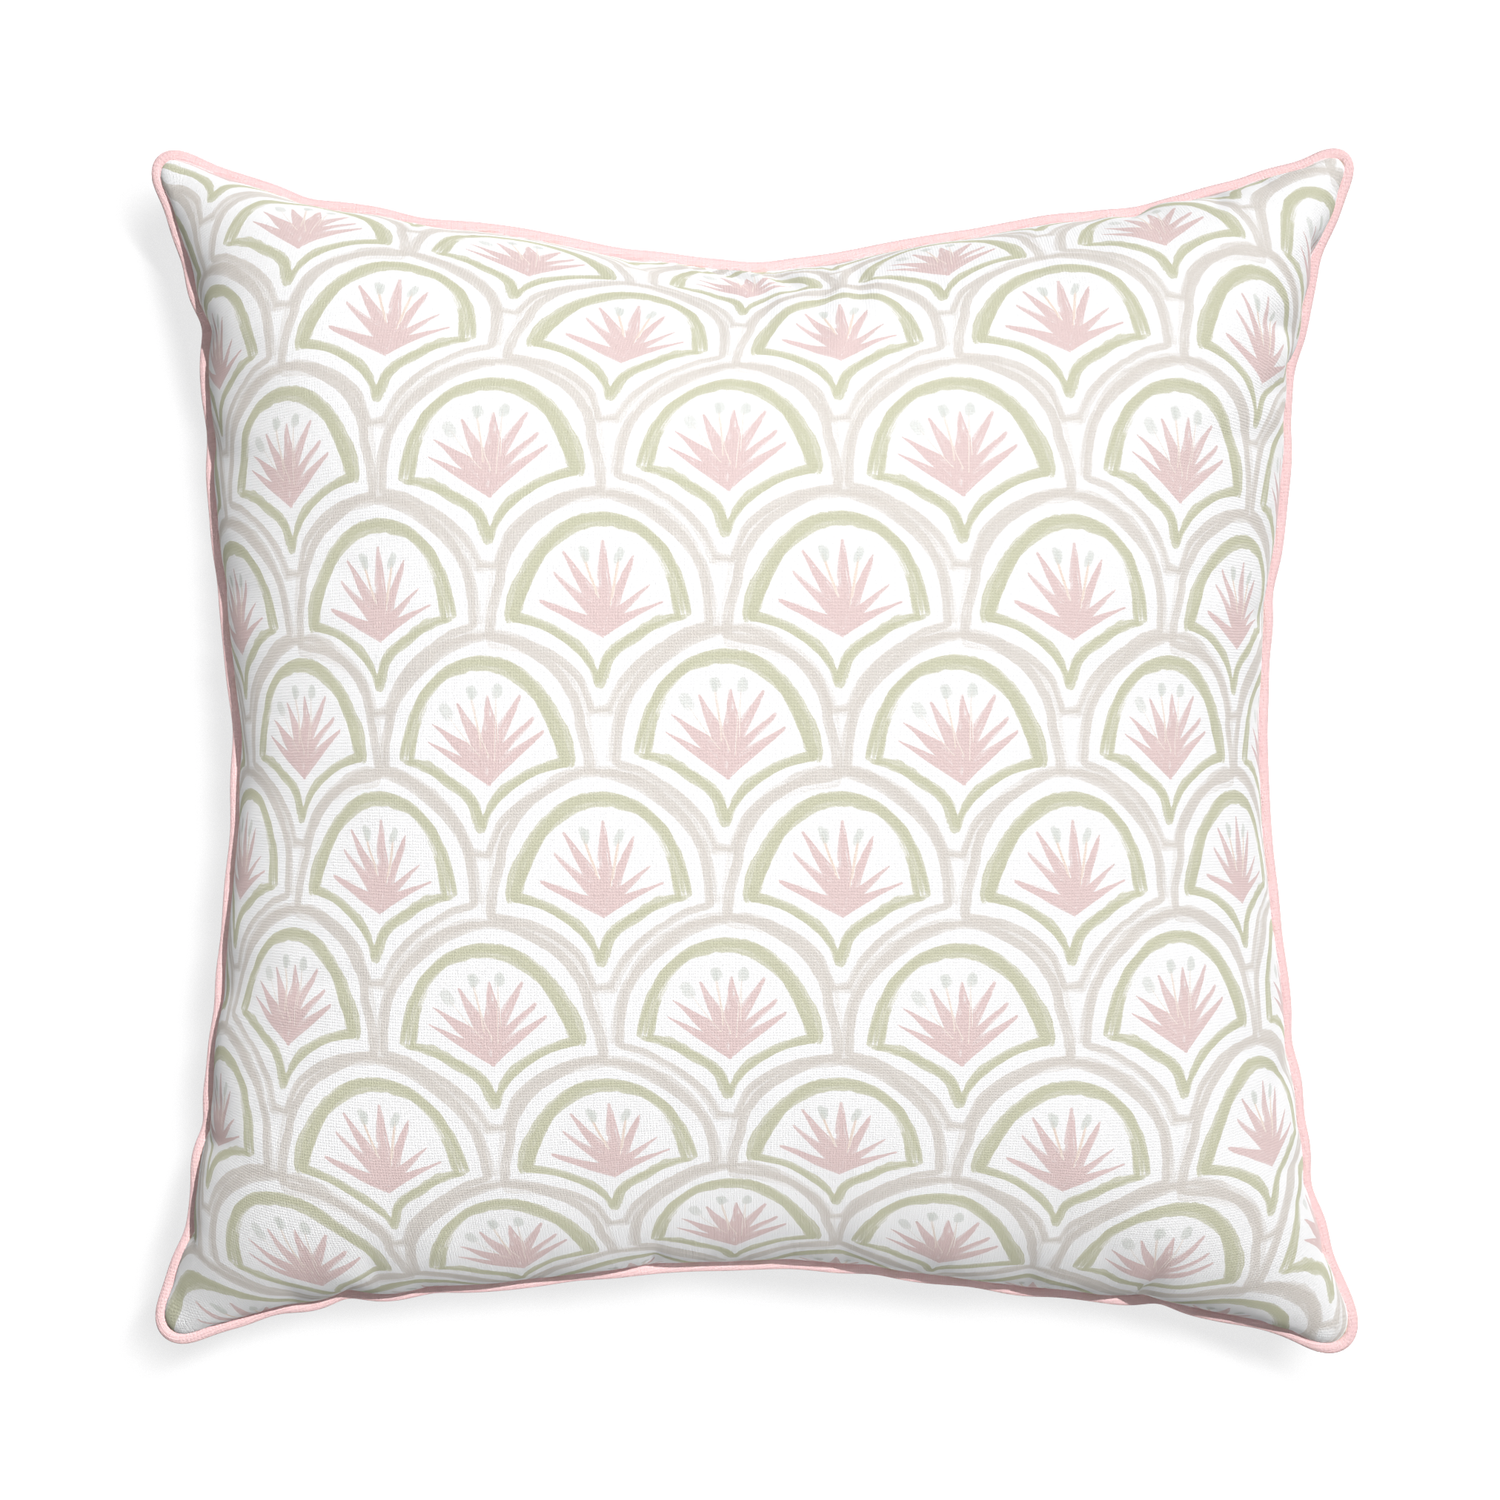 Euro-sham thatcher rose custom pink & green palmpillow with petal piping on white background